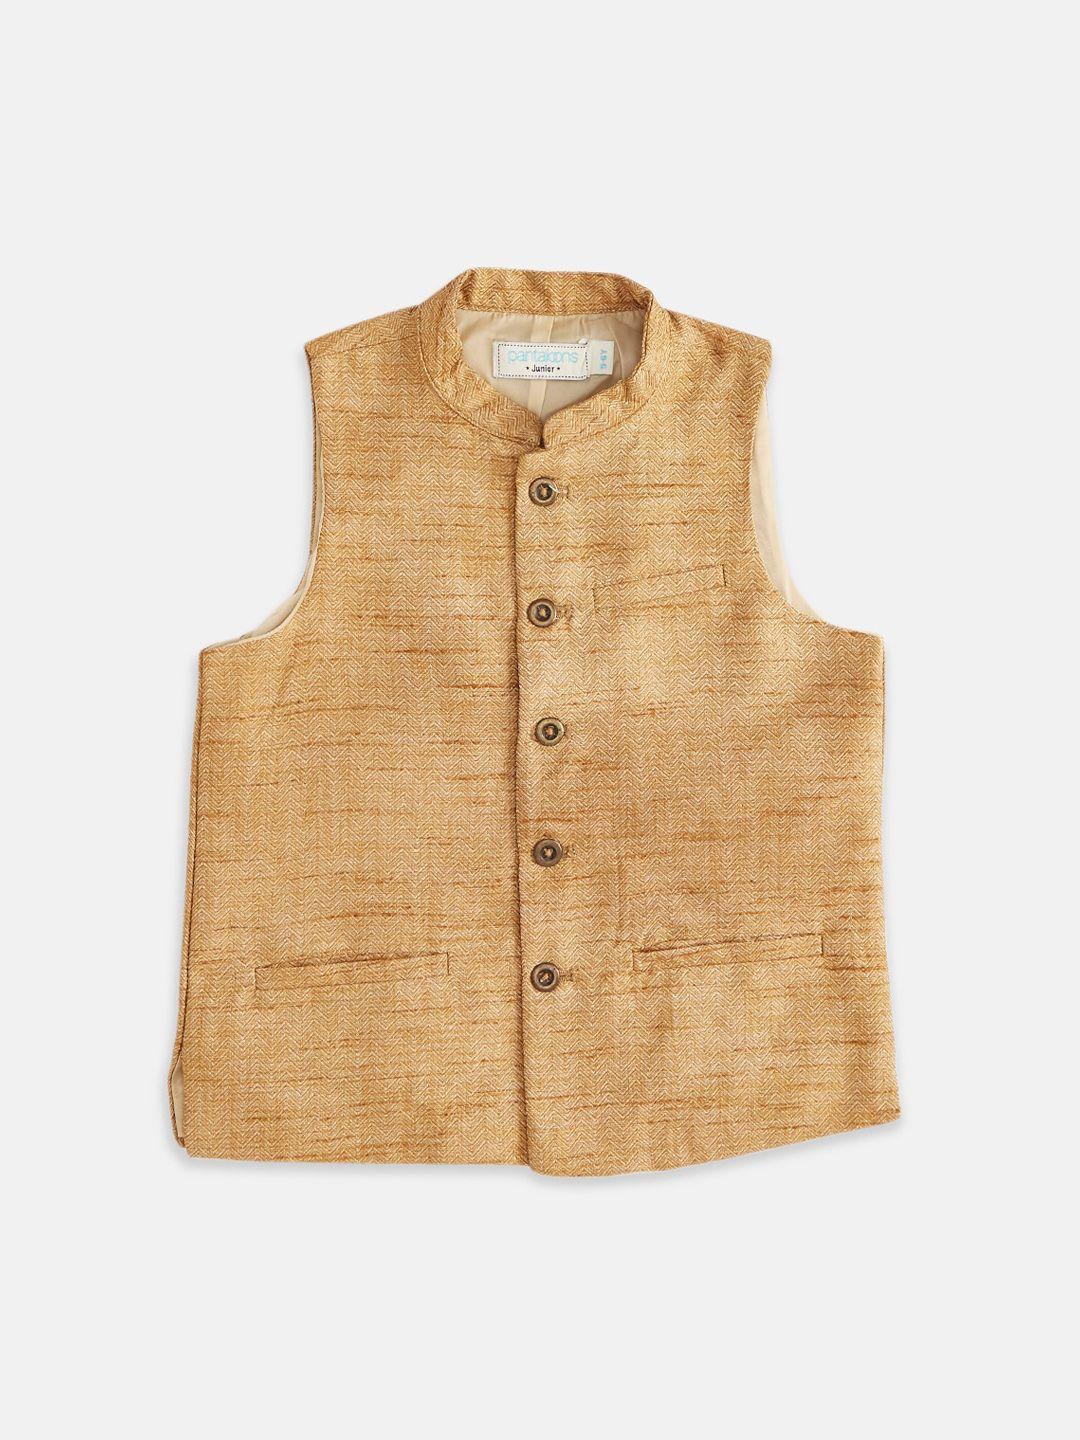 indus route by pantaloons gold patterned waistcoat